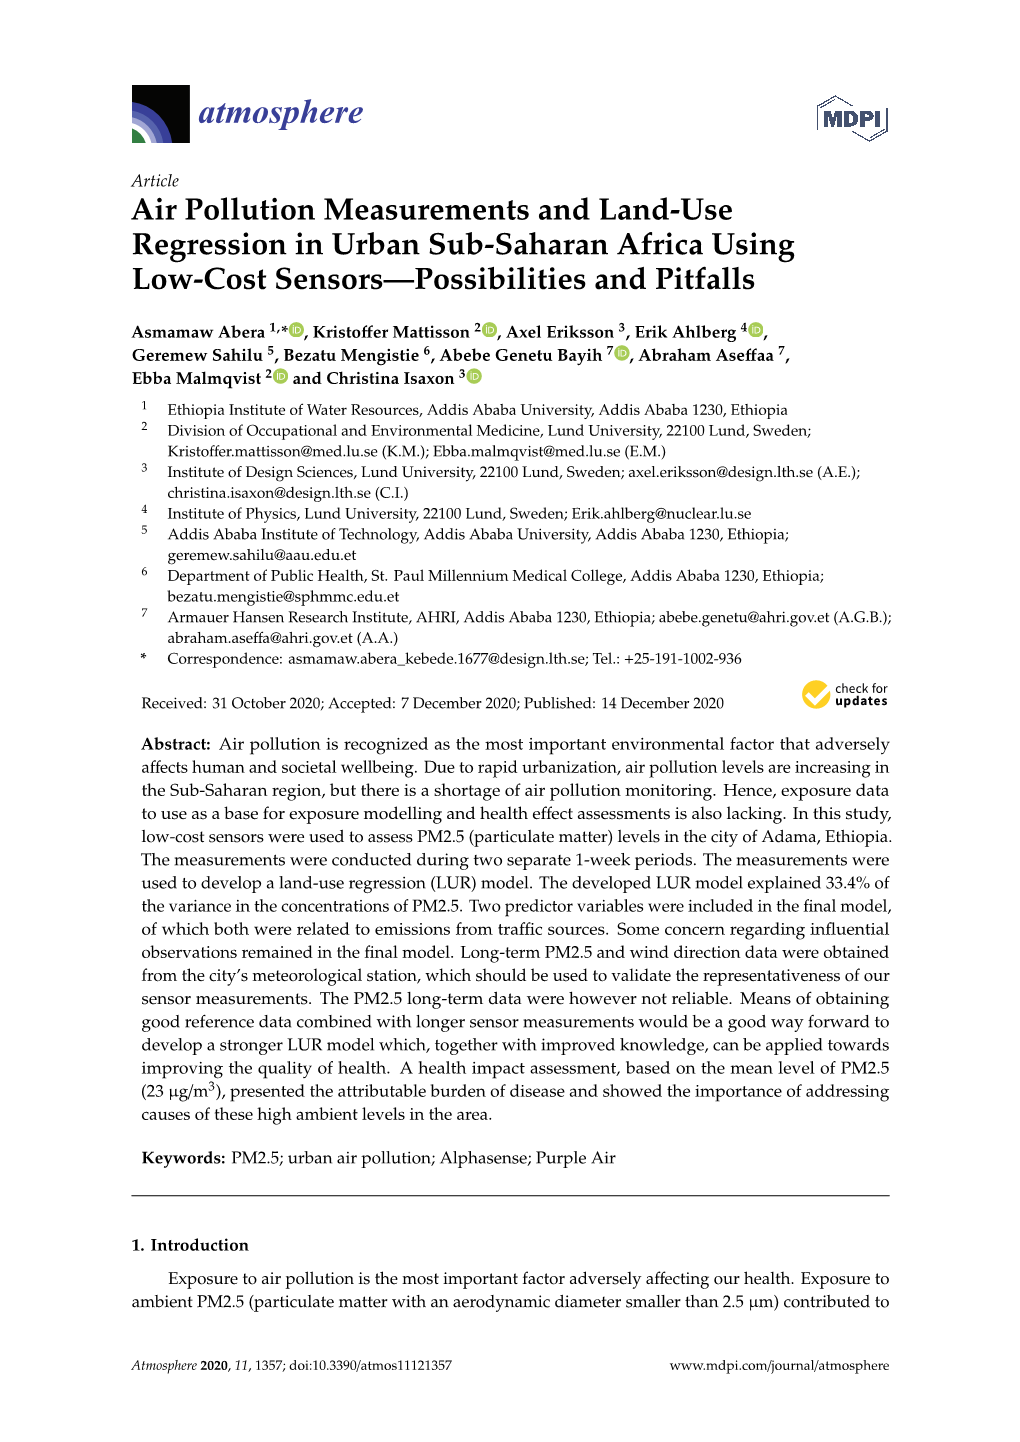 Air Pollution Measurements and Land-Use Regression in Urban Sub-Saharan Africa Using Low-Cost Sensors—Possibilities and Pitfalls